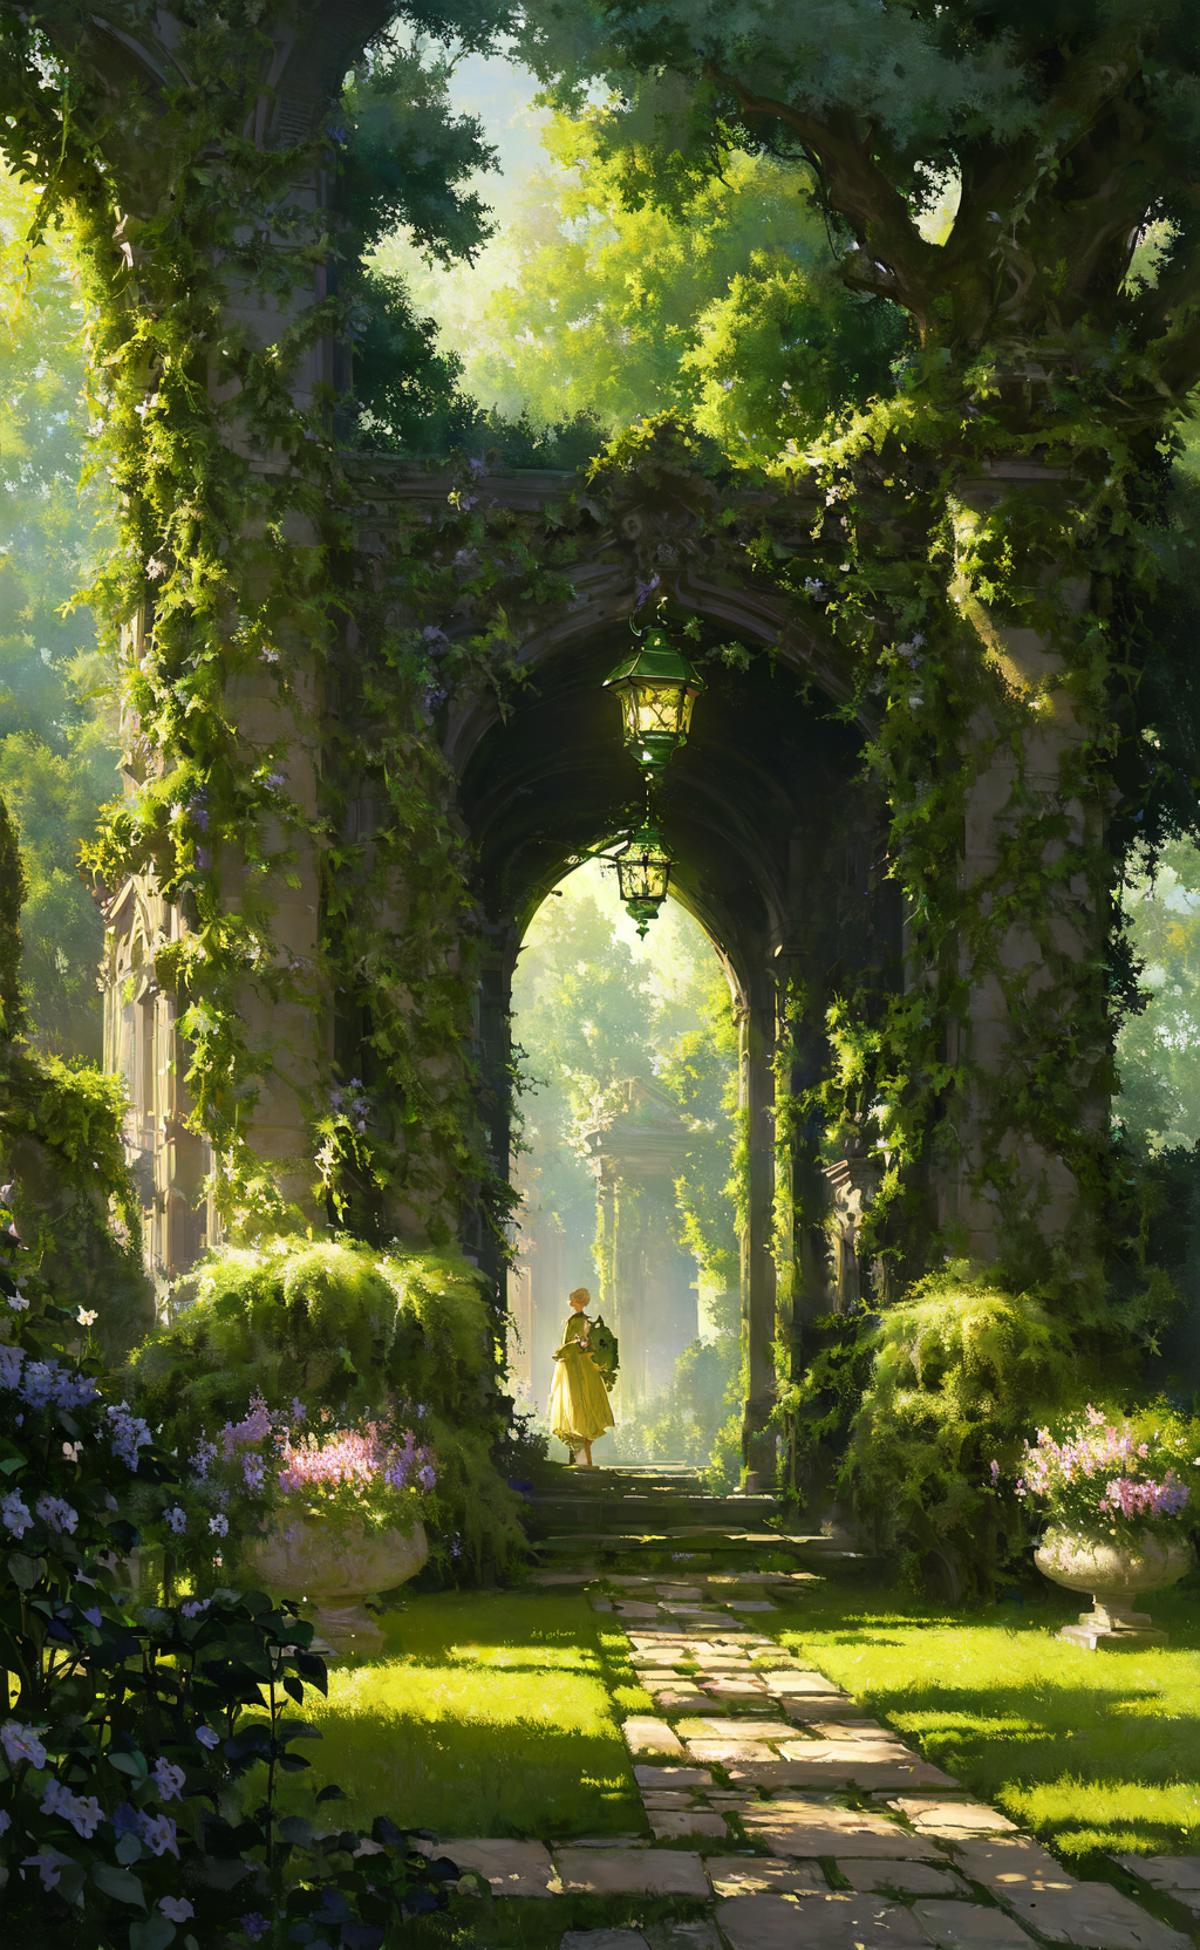 A woman walking through a green archway with vines and flowers.